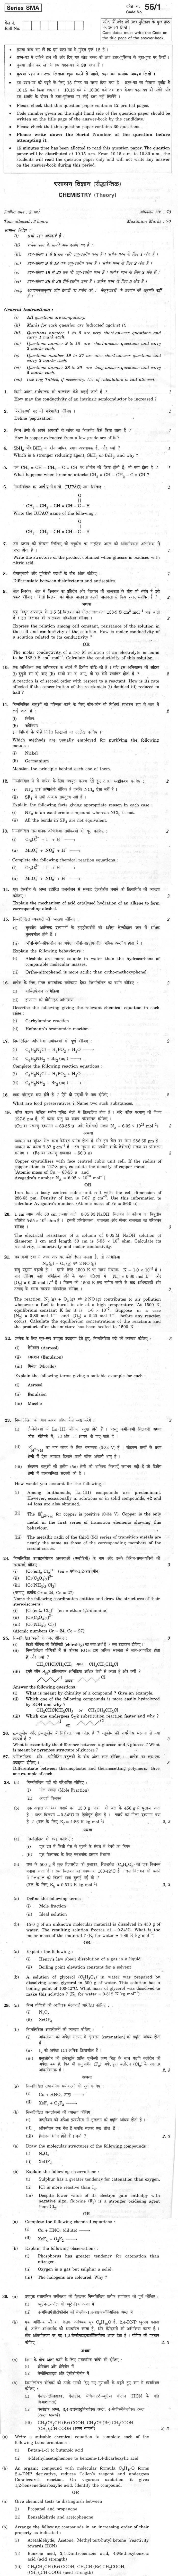 CBSE Class XII Previous Year Question Paper 2012 Chemistry